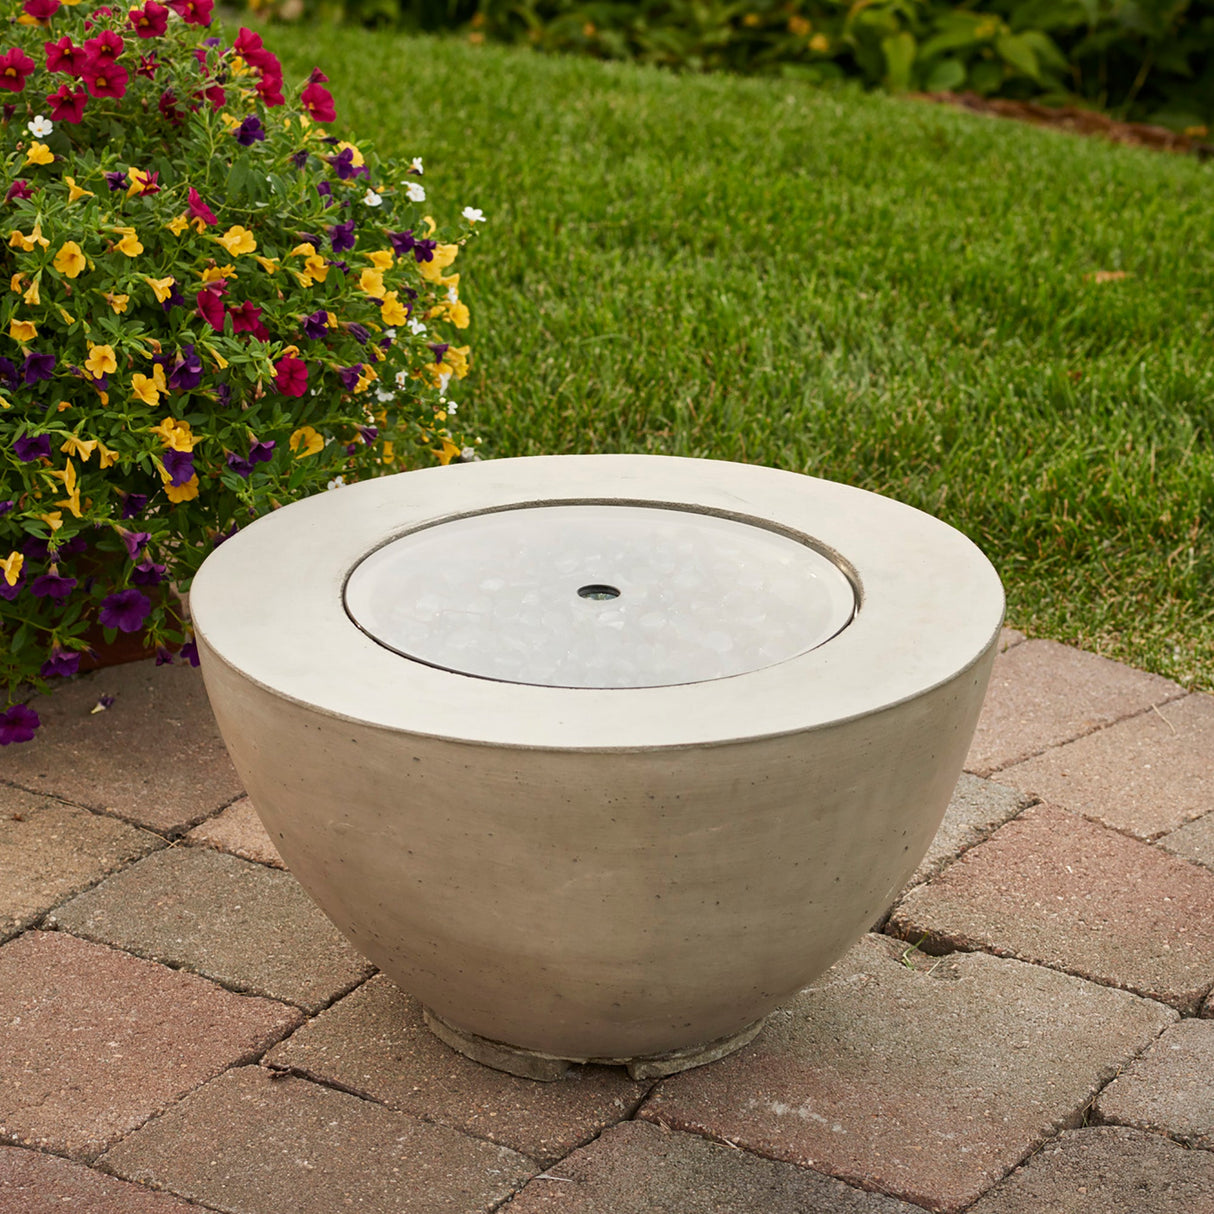 The 12" Round Glass Burner Cover being used on a fire pit bowl